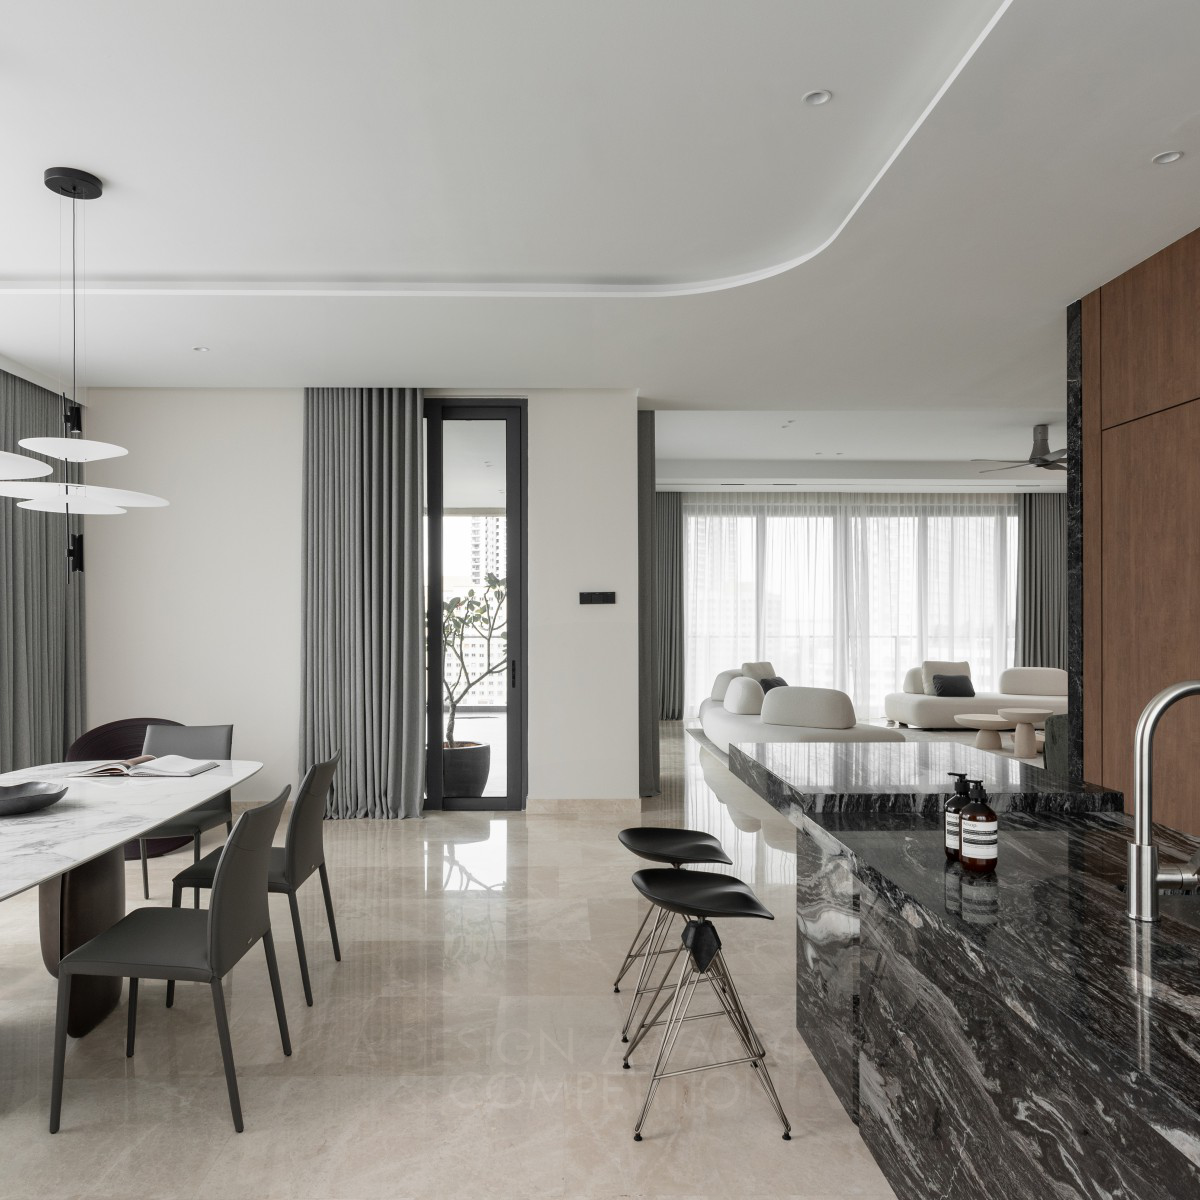 RUPERT OOI SAY YUNG wins Bronze at the prestigious A' Interior Space, Retail and Exhibition Design Award with HL Residence Residential Interior Design.